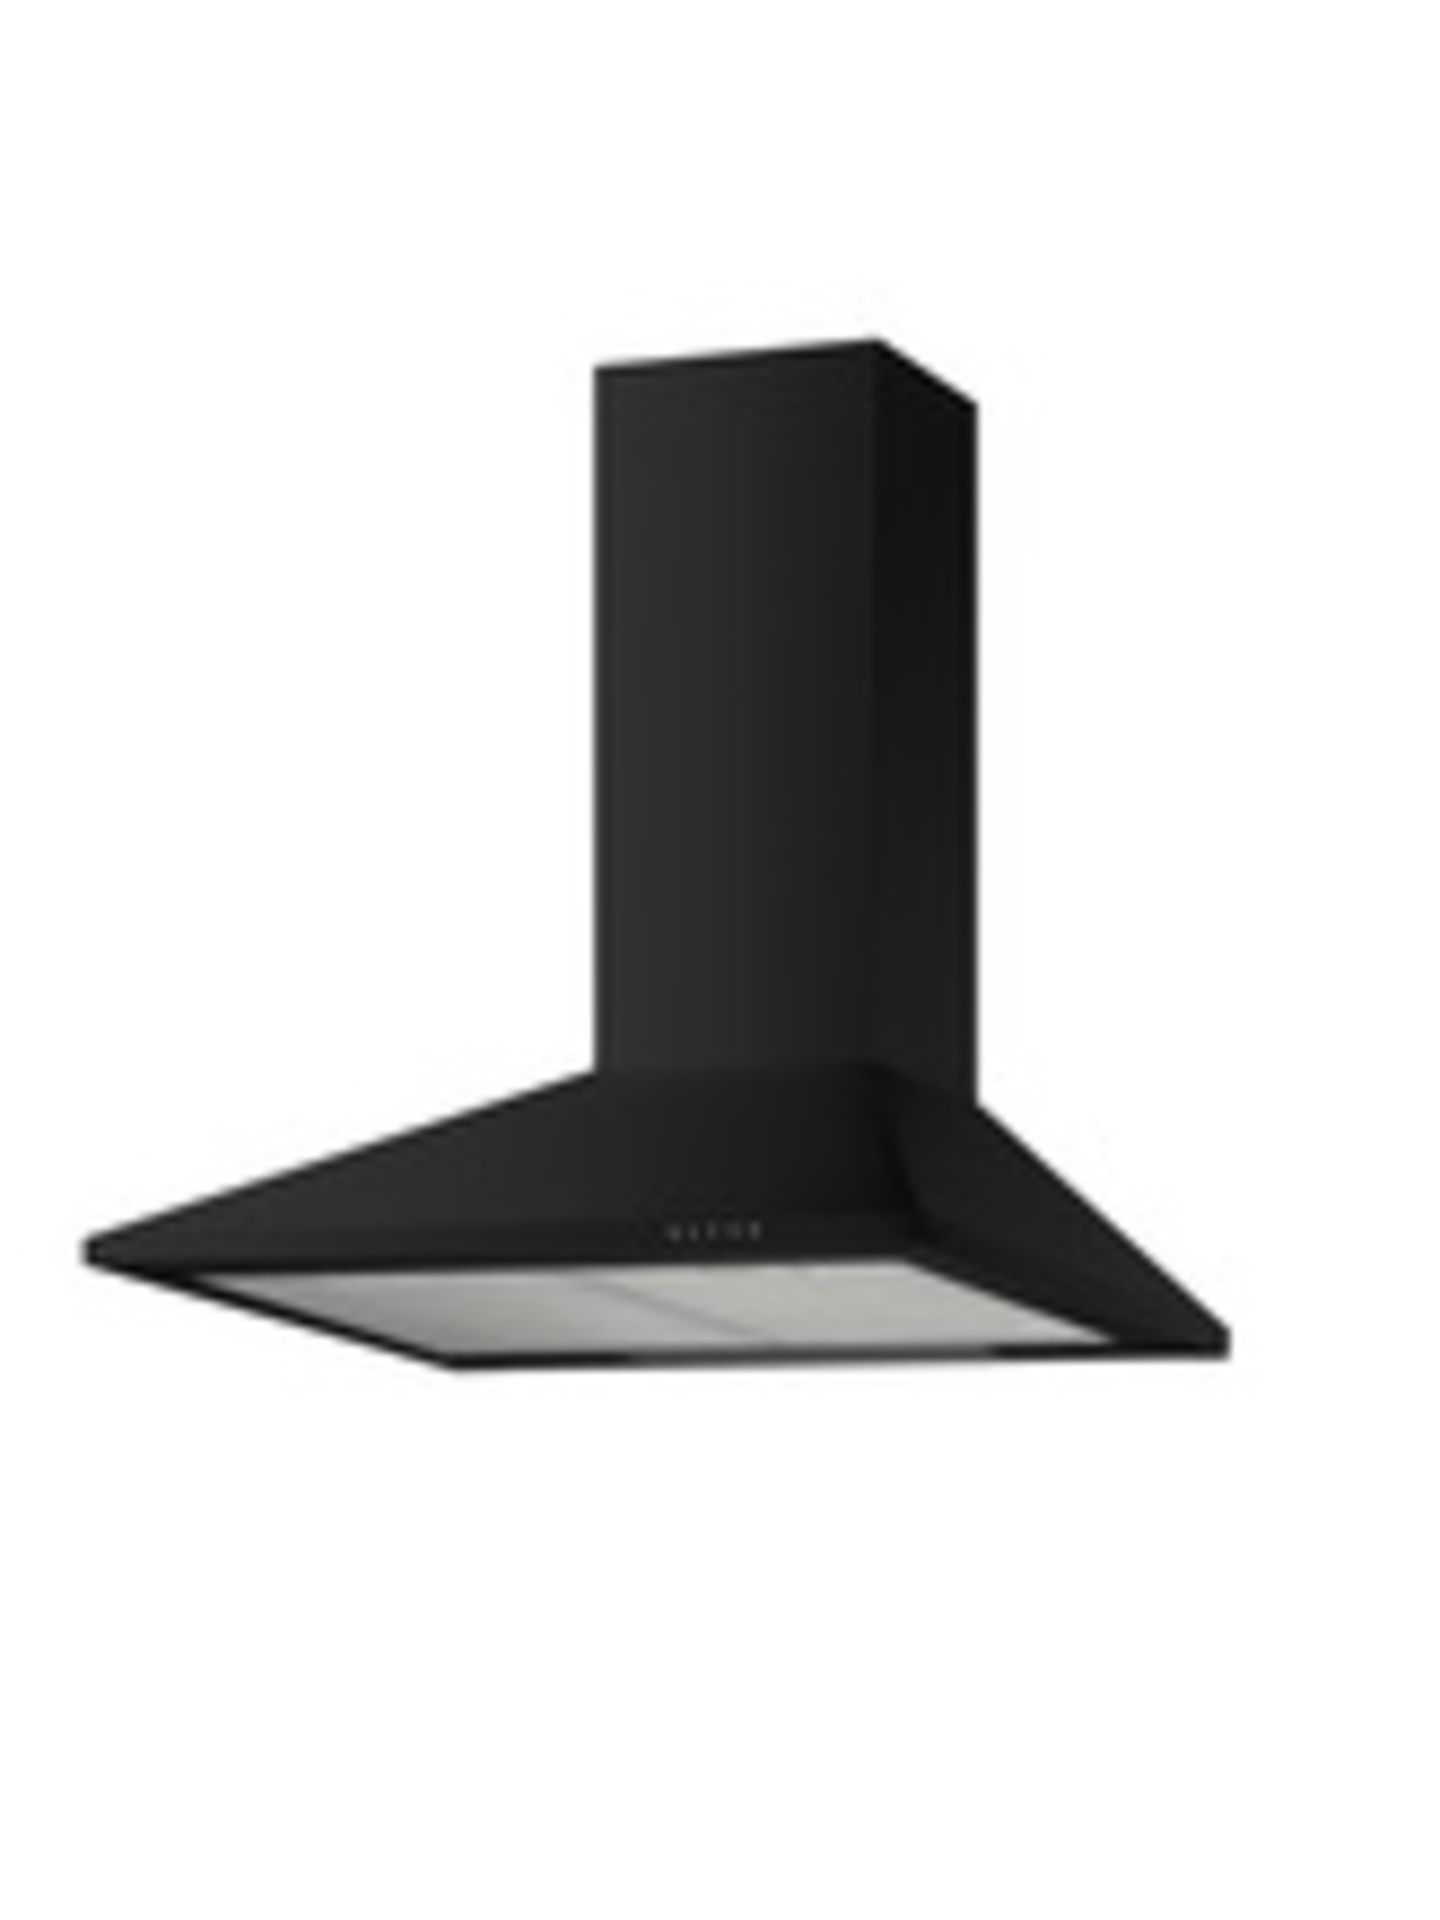 Boxed CHIM60KPF 60cm Cooker Hood in Black (Viewing Is Highly Recommended)